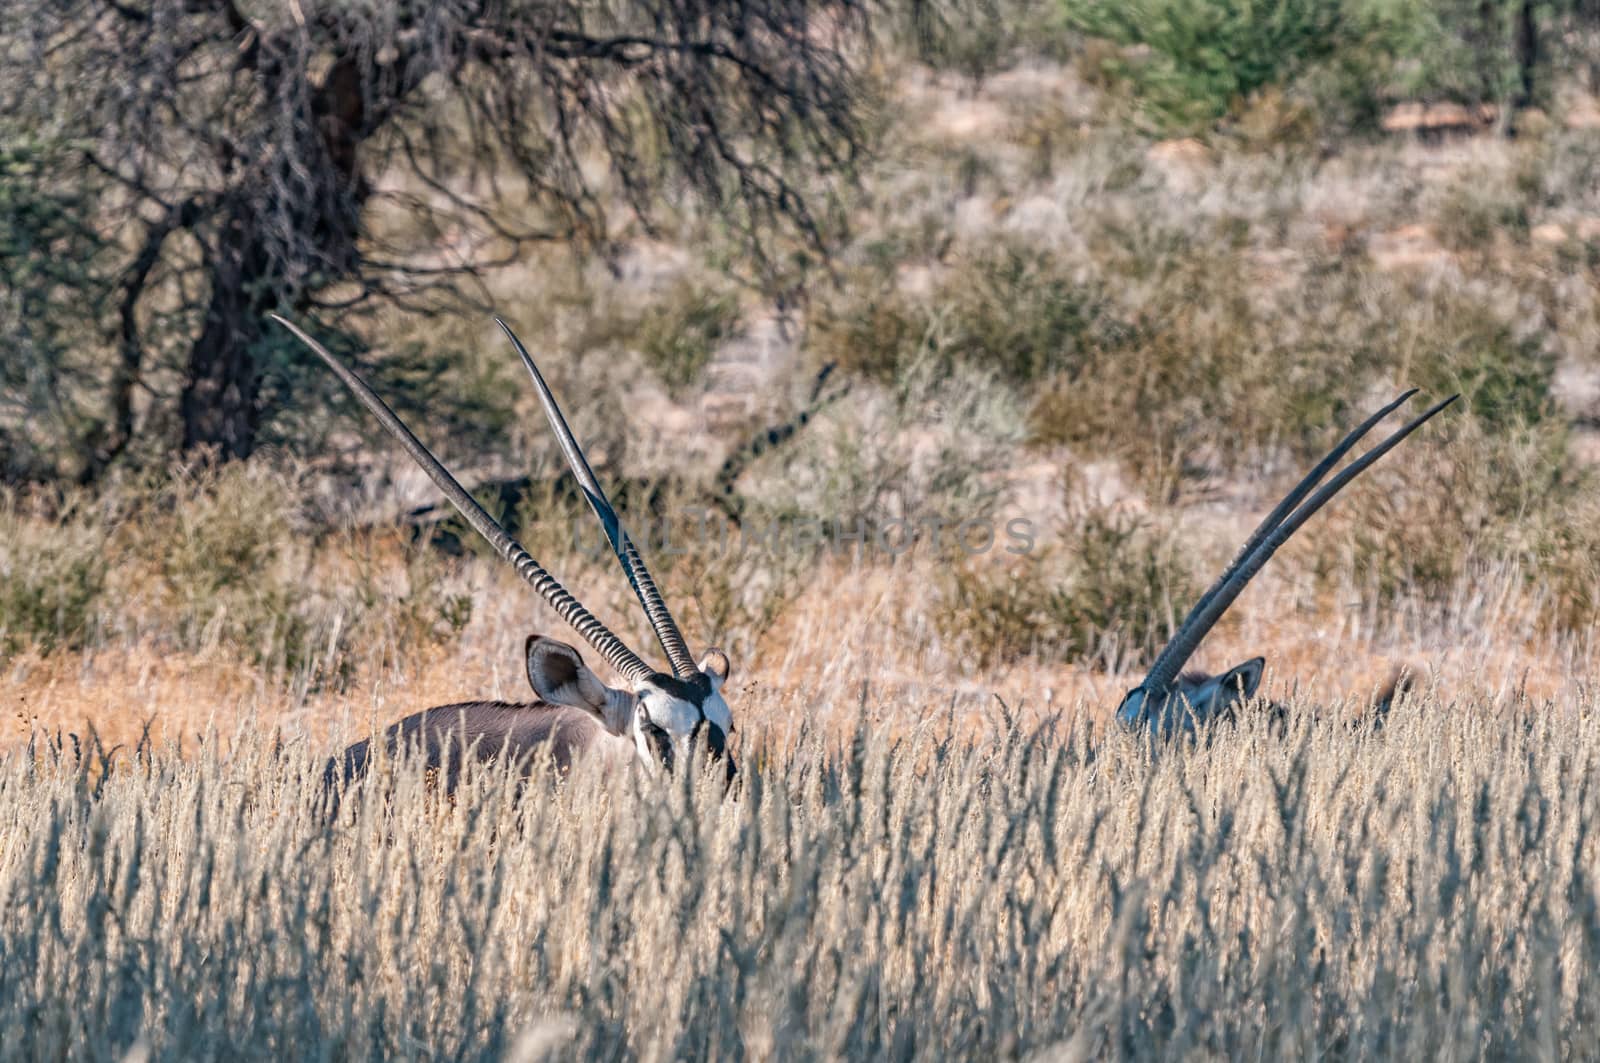 Two oryx in tall grass in the arid Kgalagadi by dpreezg